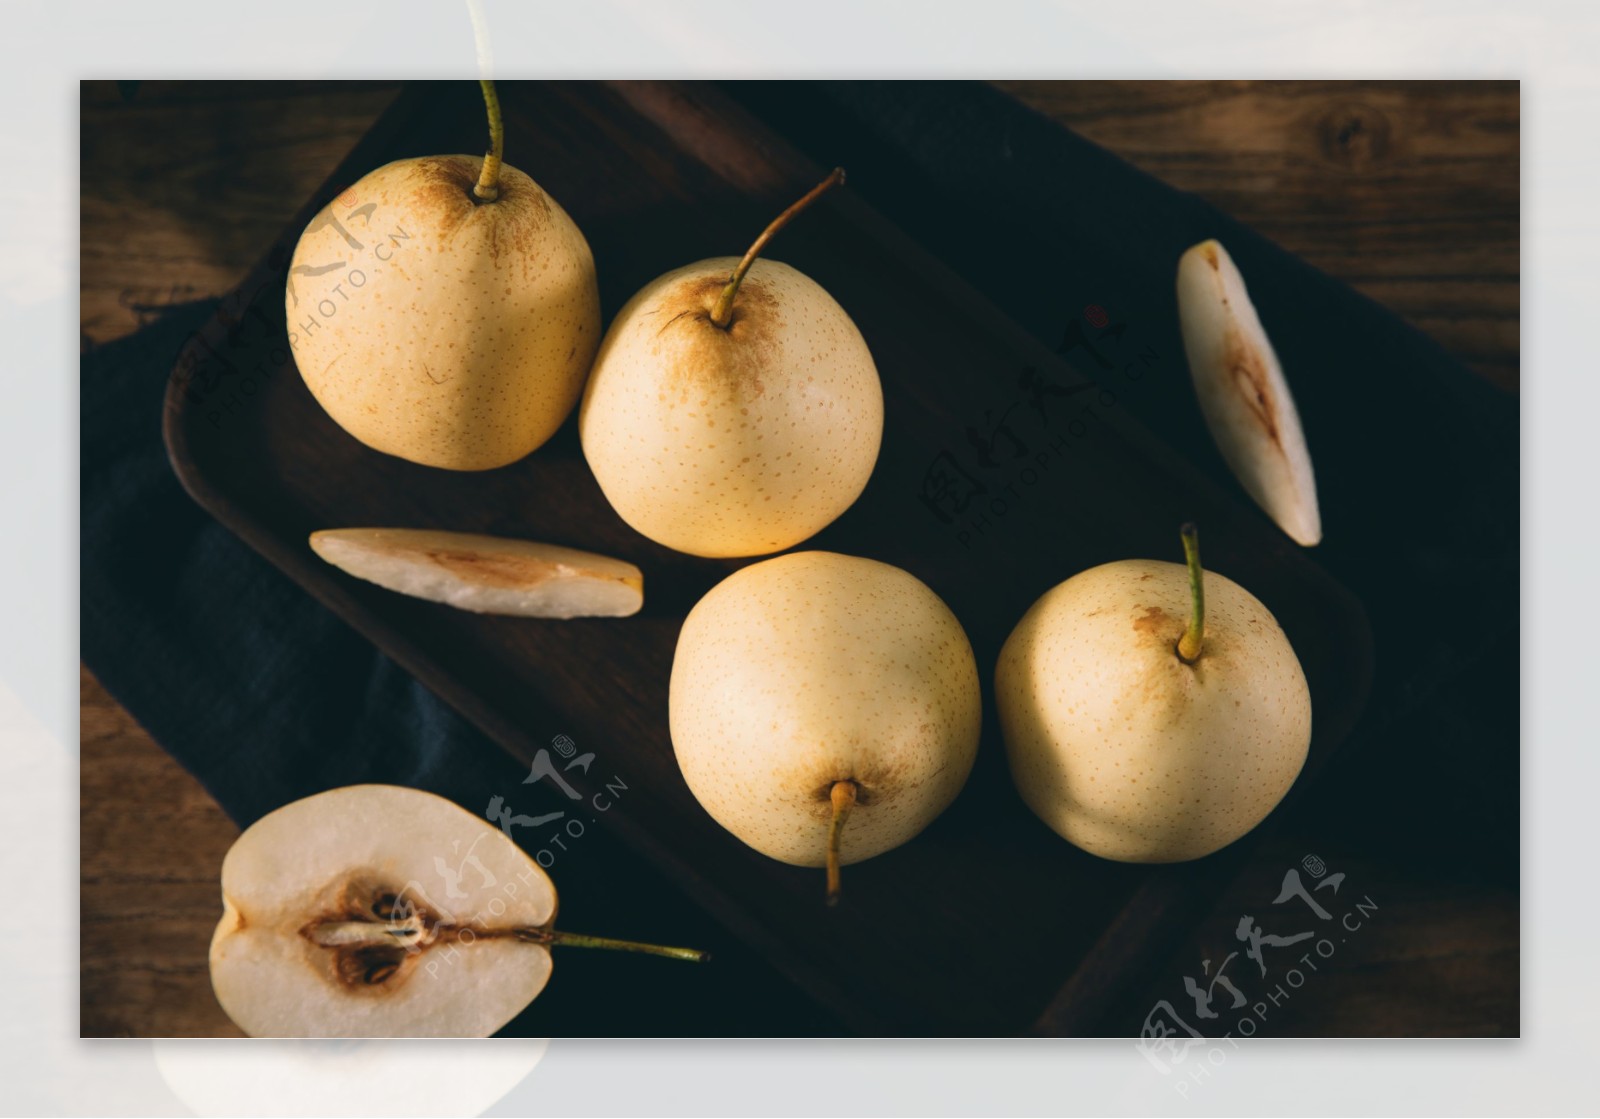 Pear Chinese | 雪梨 | PC | Foon Foon | Fresh Food Meal Box Delivery